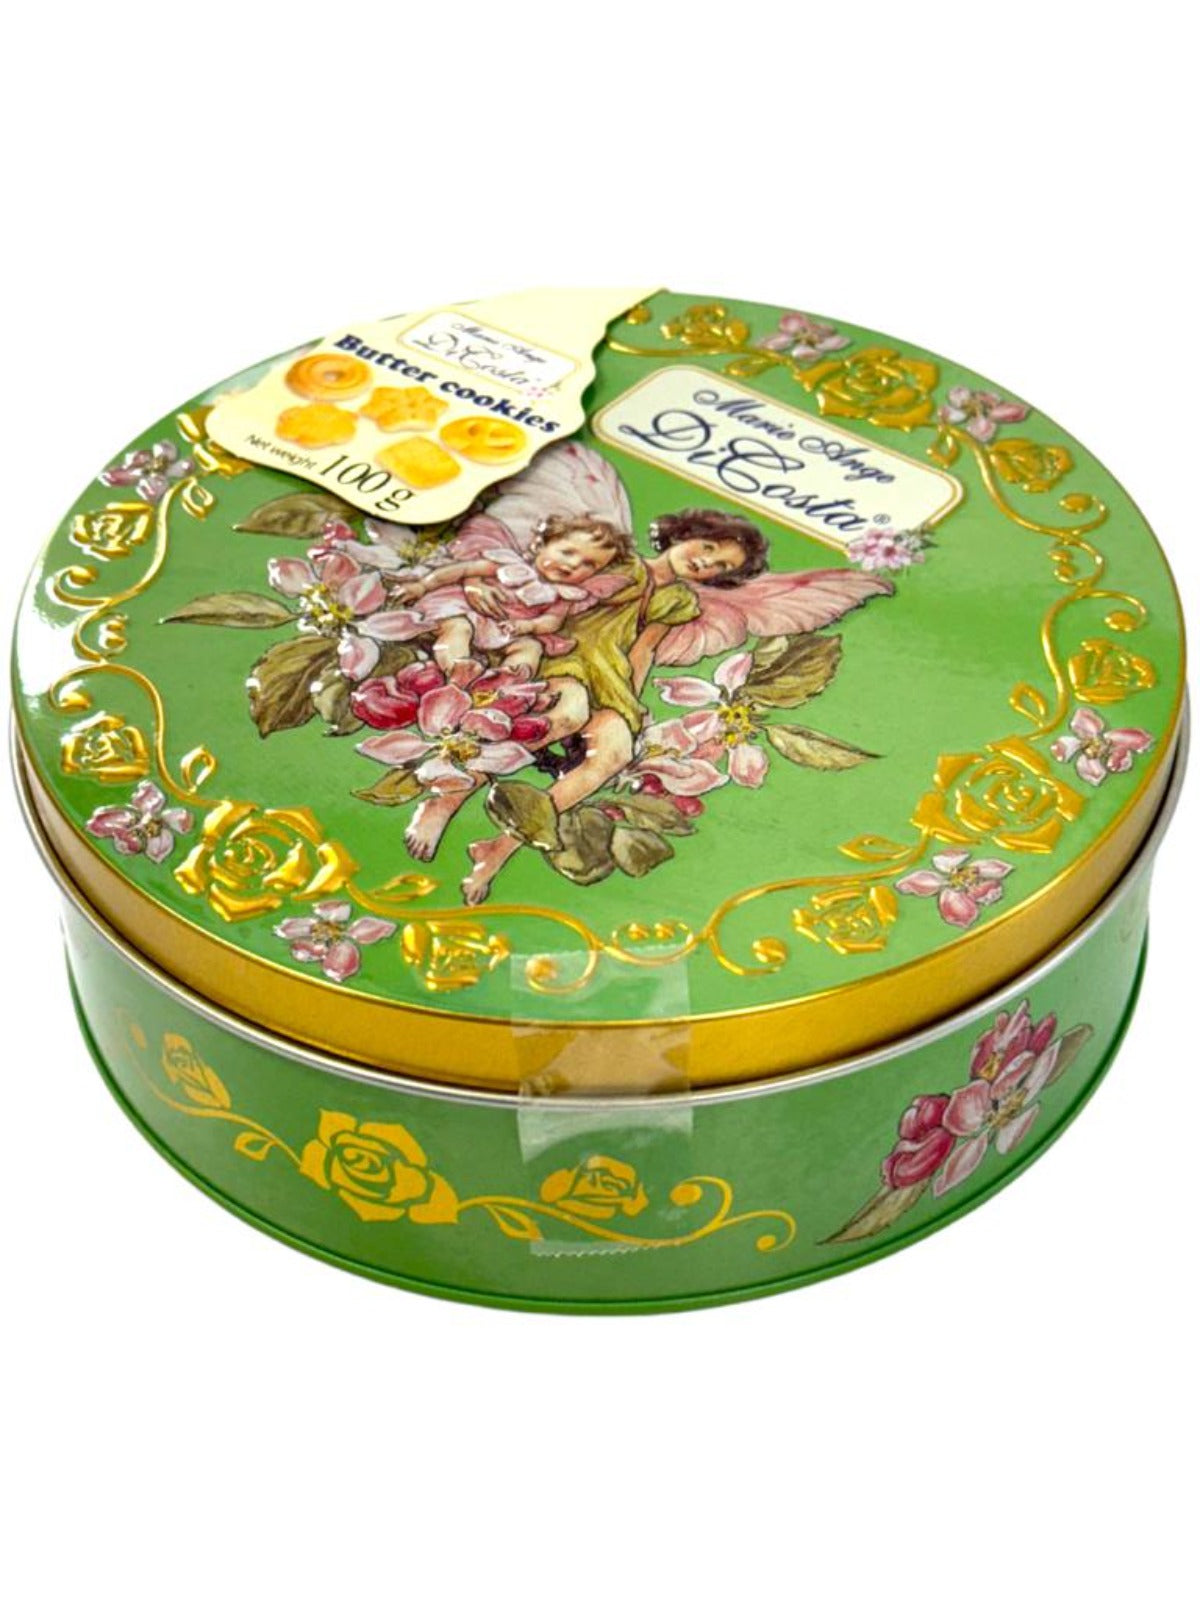 Marie Ange di Costa Flower Fairy Italian Butter Cookies—Il Girotondo in Lime 100g